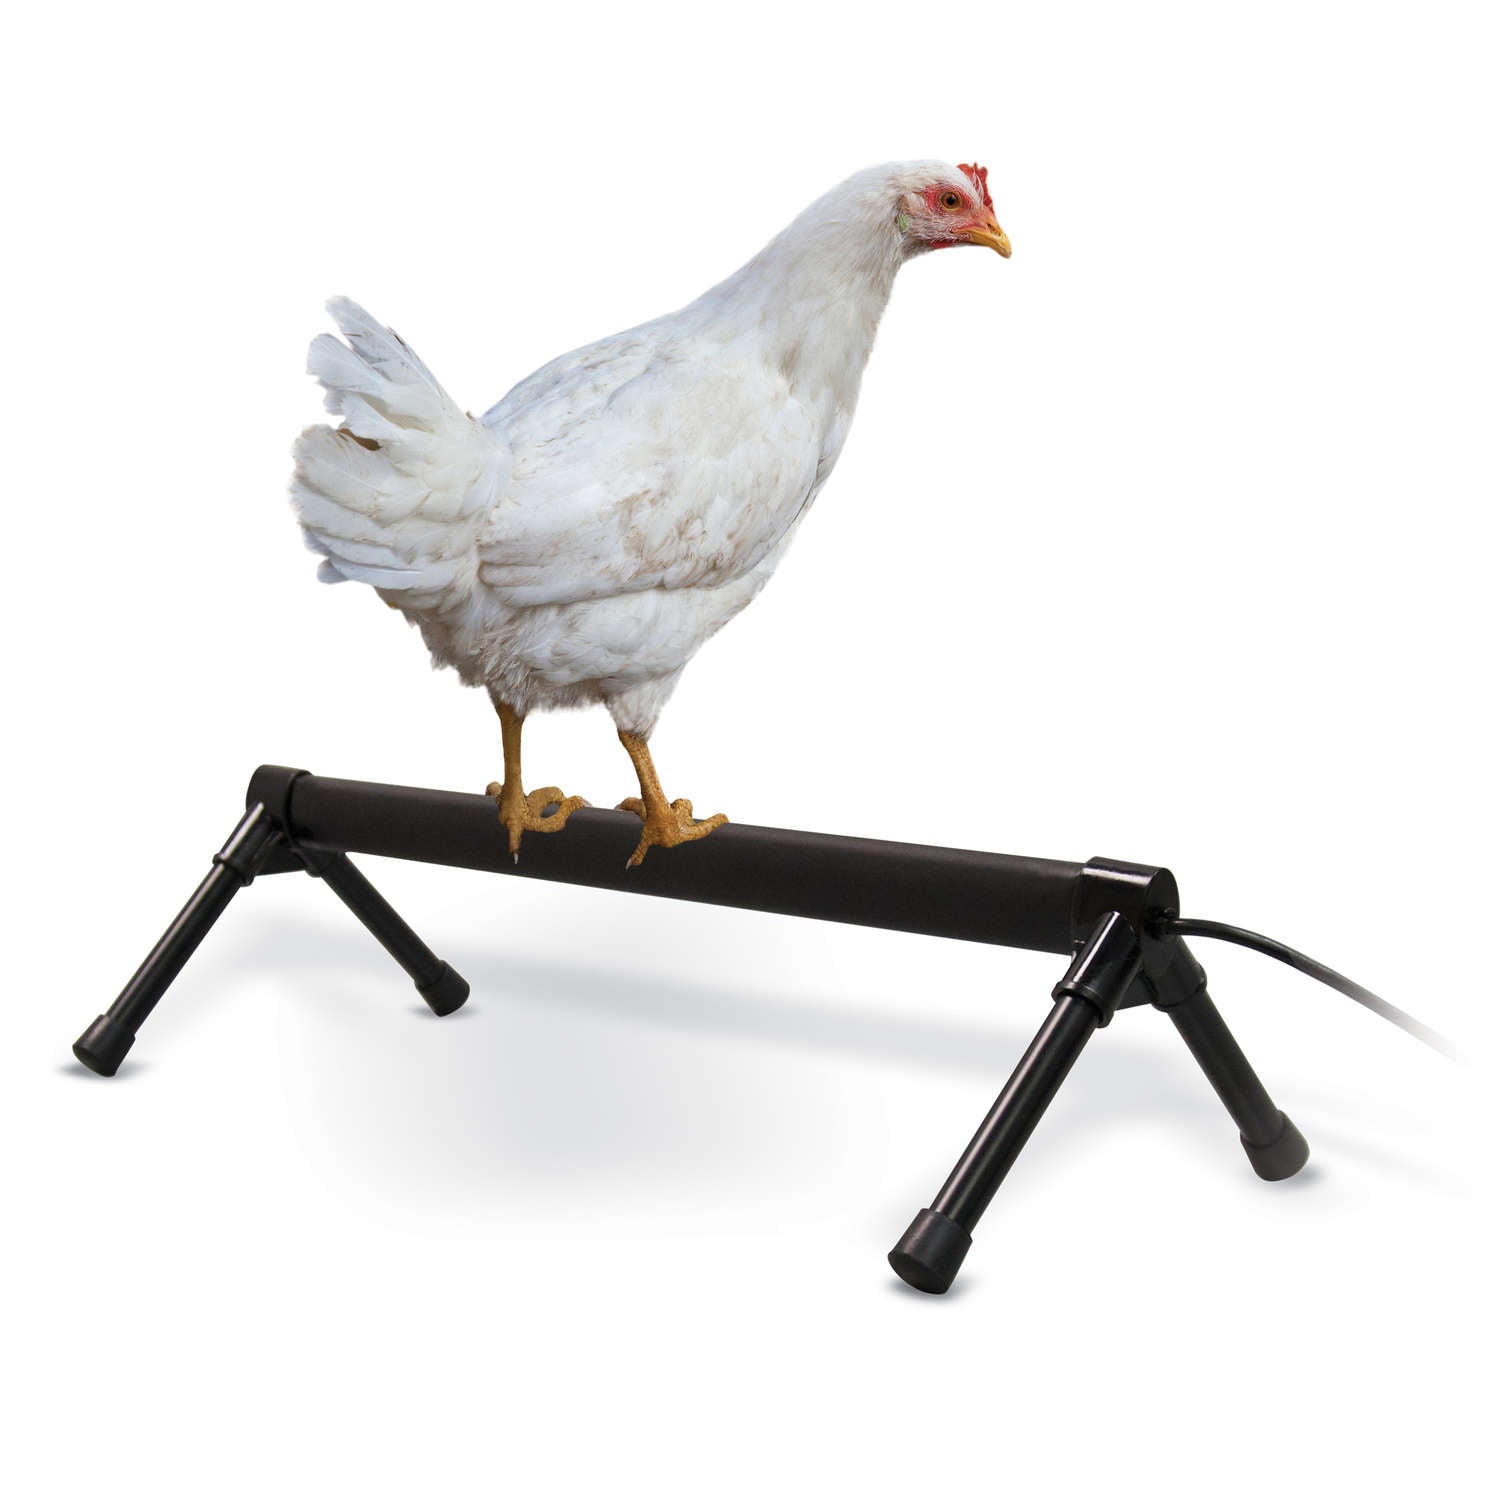 K&h Pet Products Kh2110 Thermo-chicken Perch